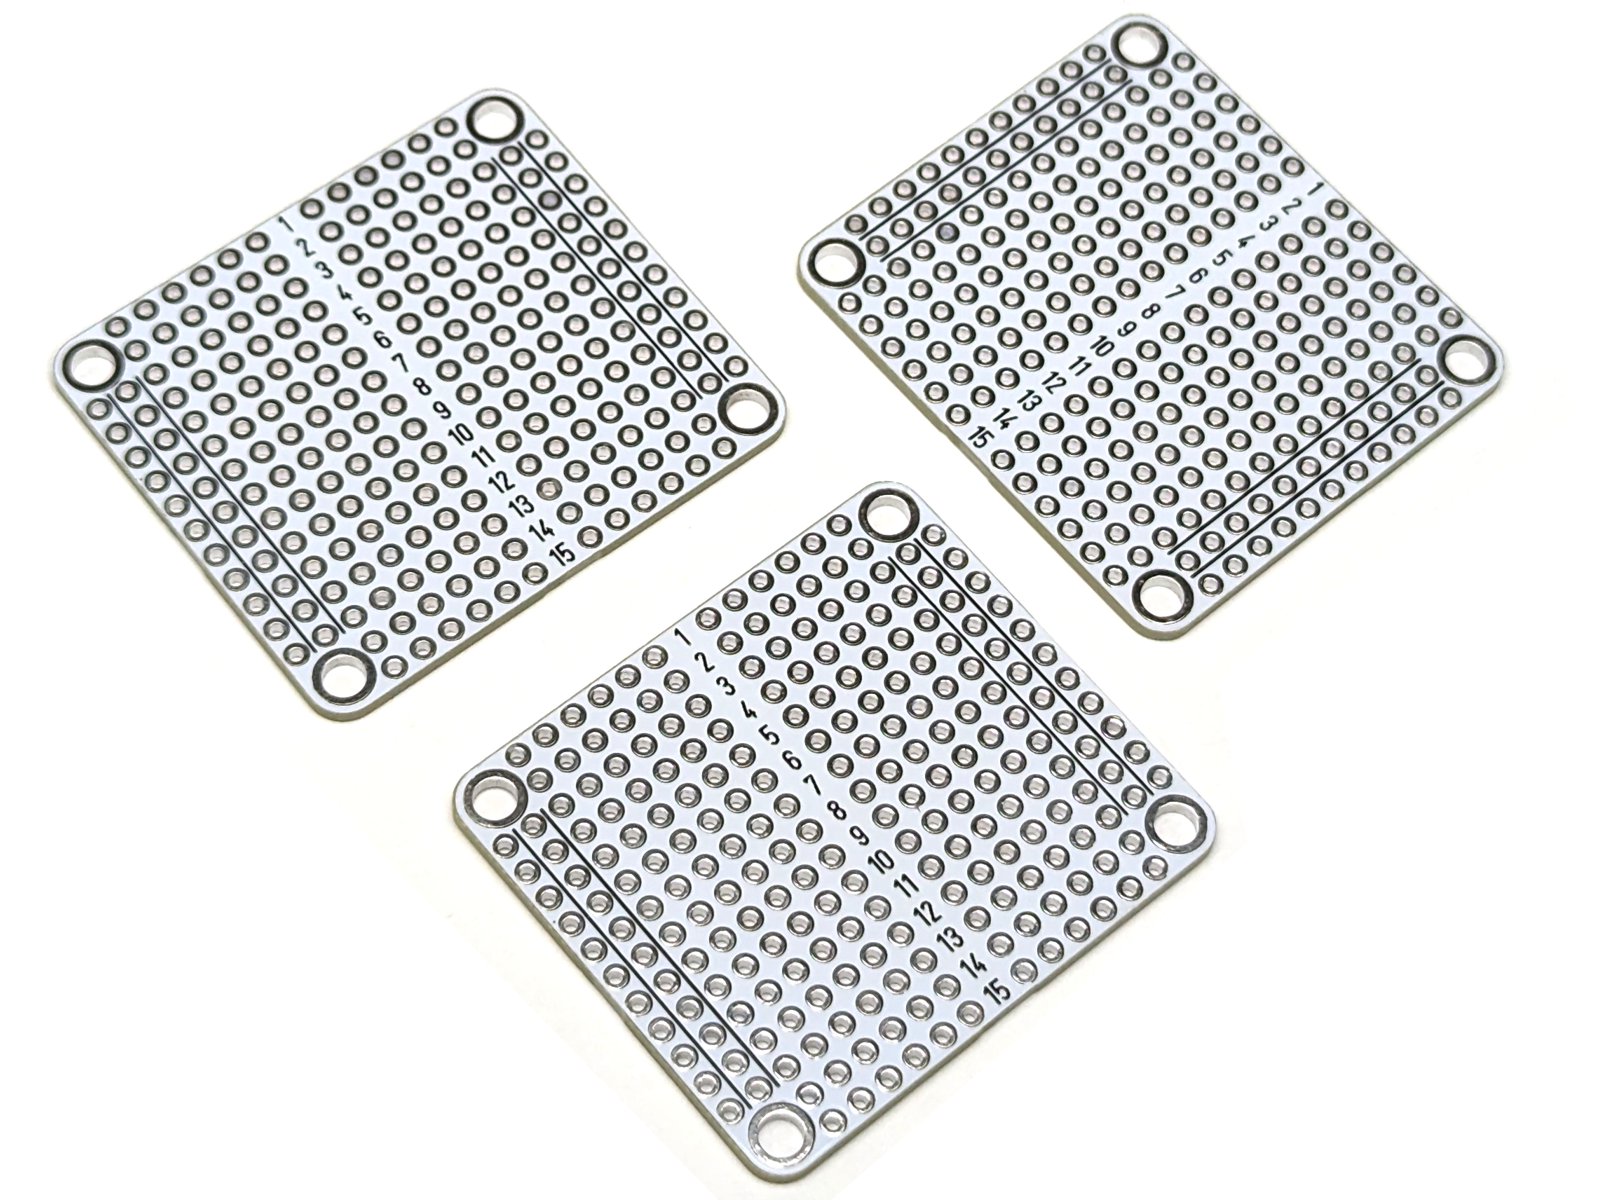 CANADUINO® Permanent Breadboard S - 224 Tie Points - Set of 3